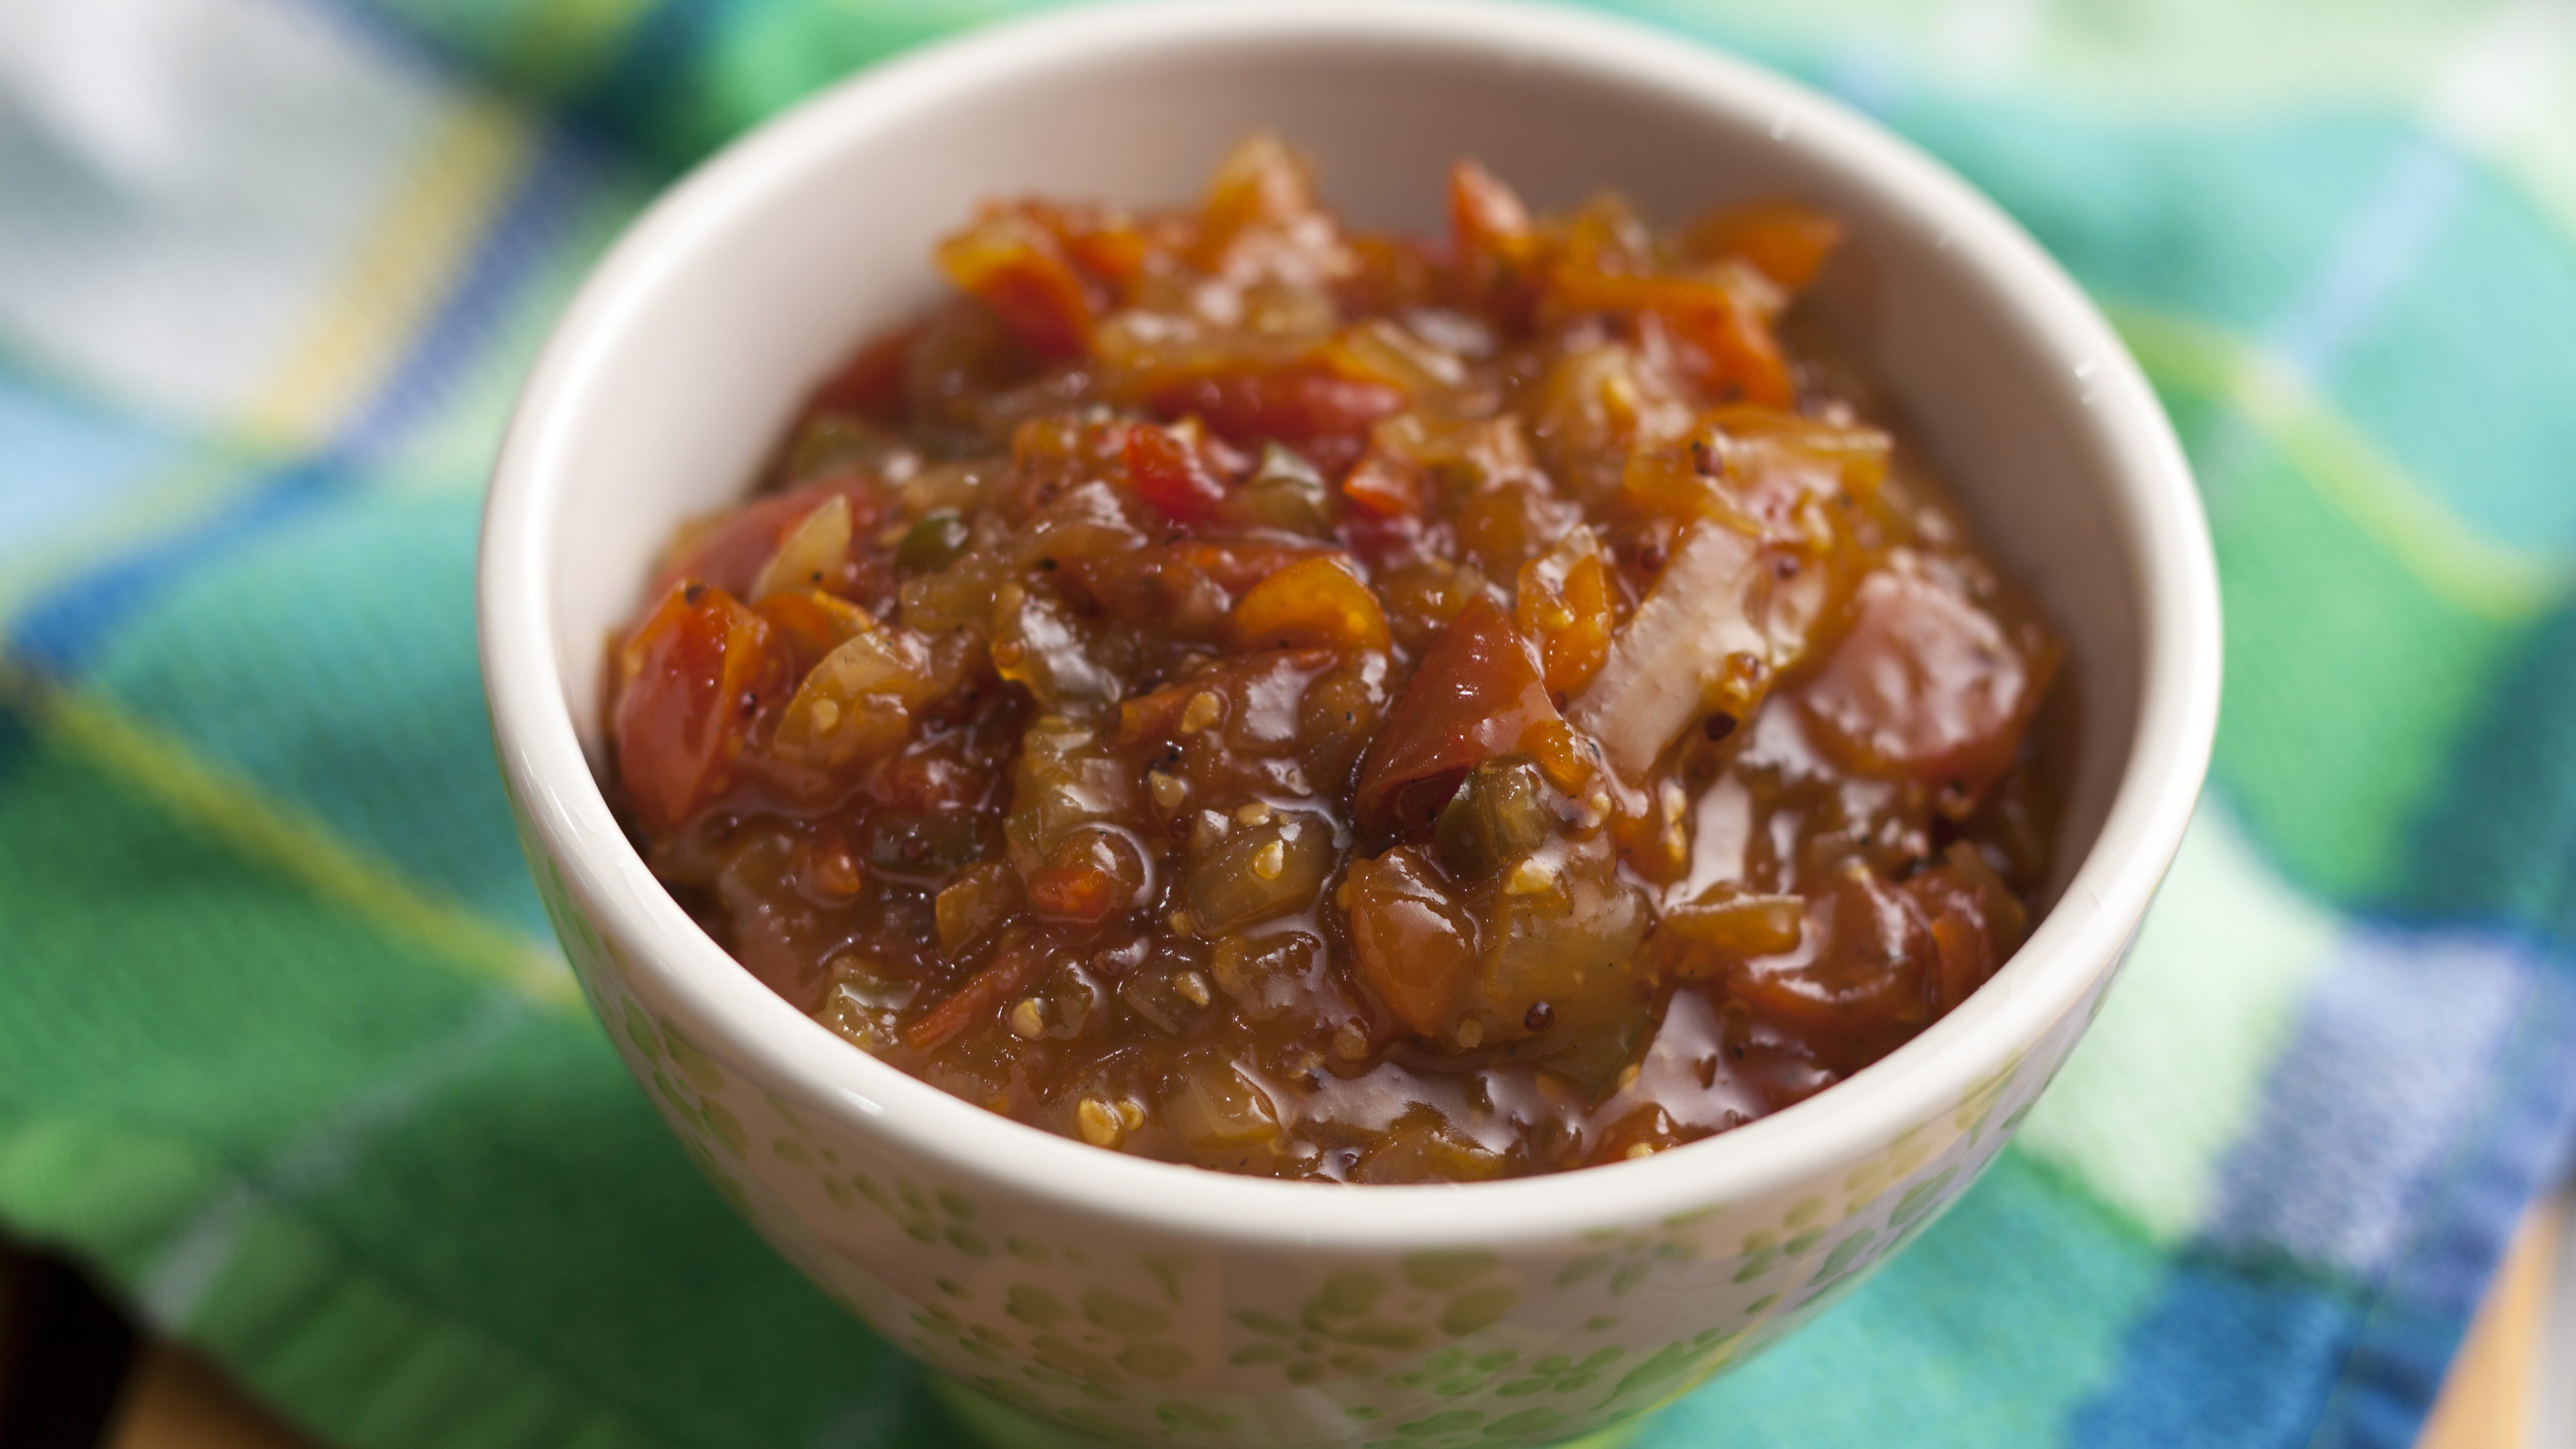 Country Magic Sweet and Savory Tomato Relish by The Kilted Chef